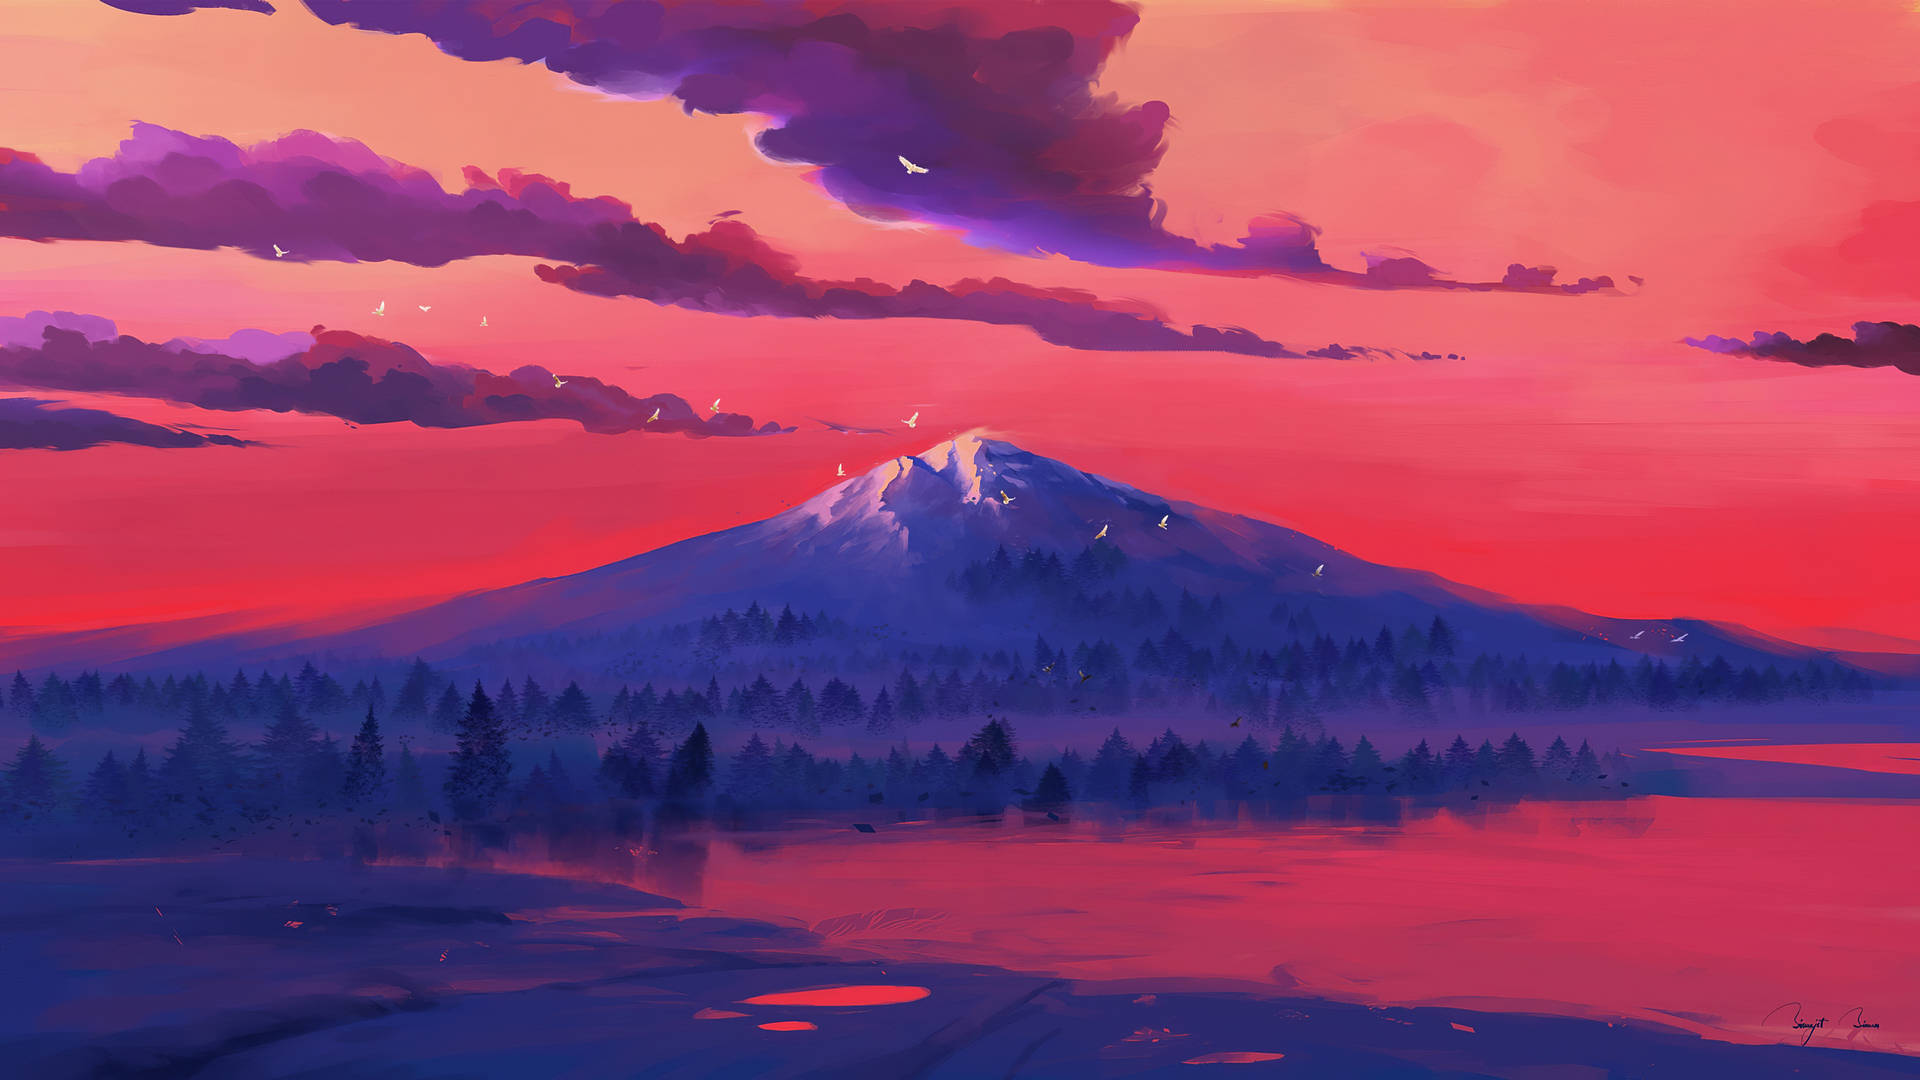 Red Mountain Art Background